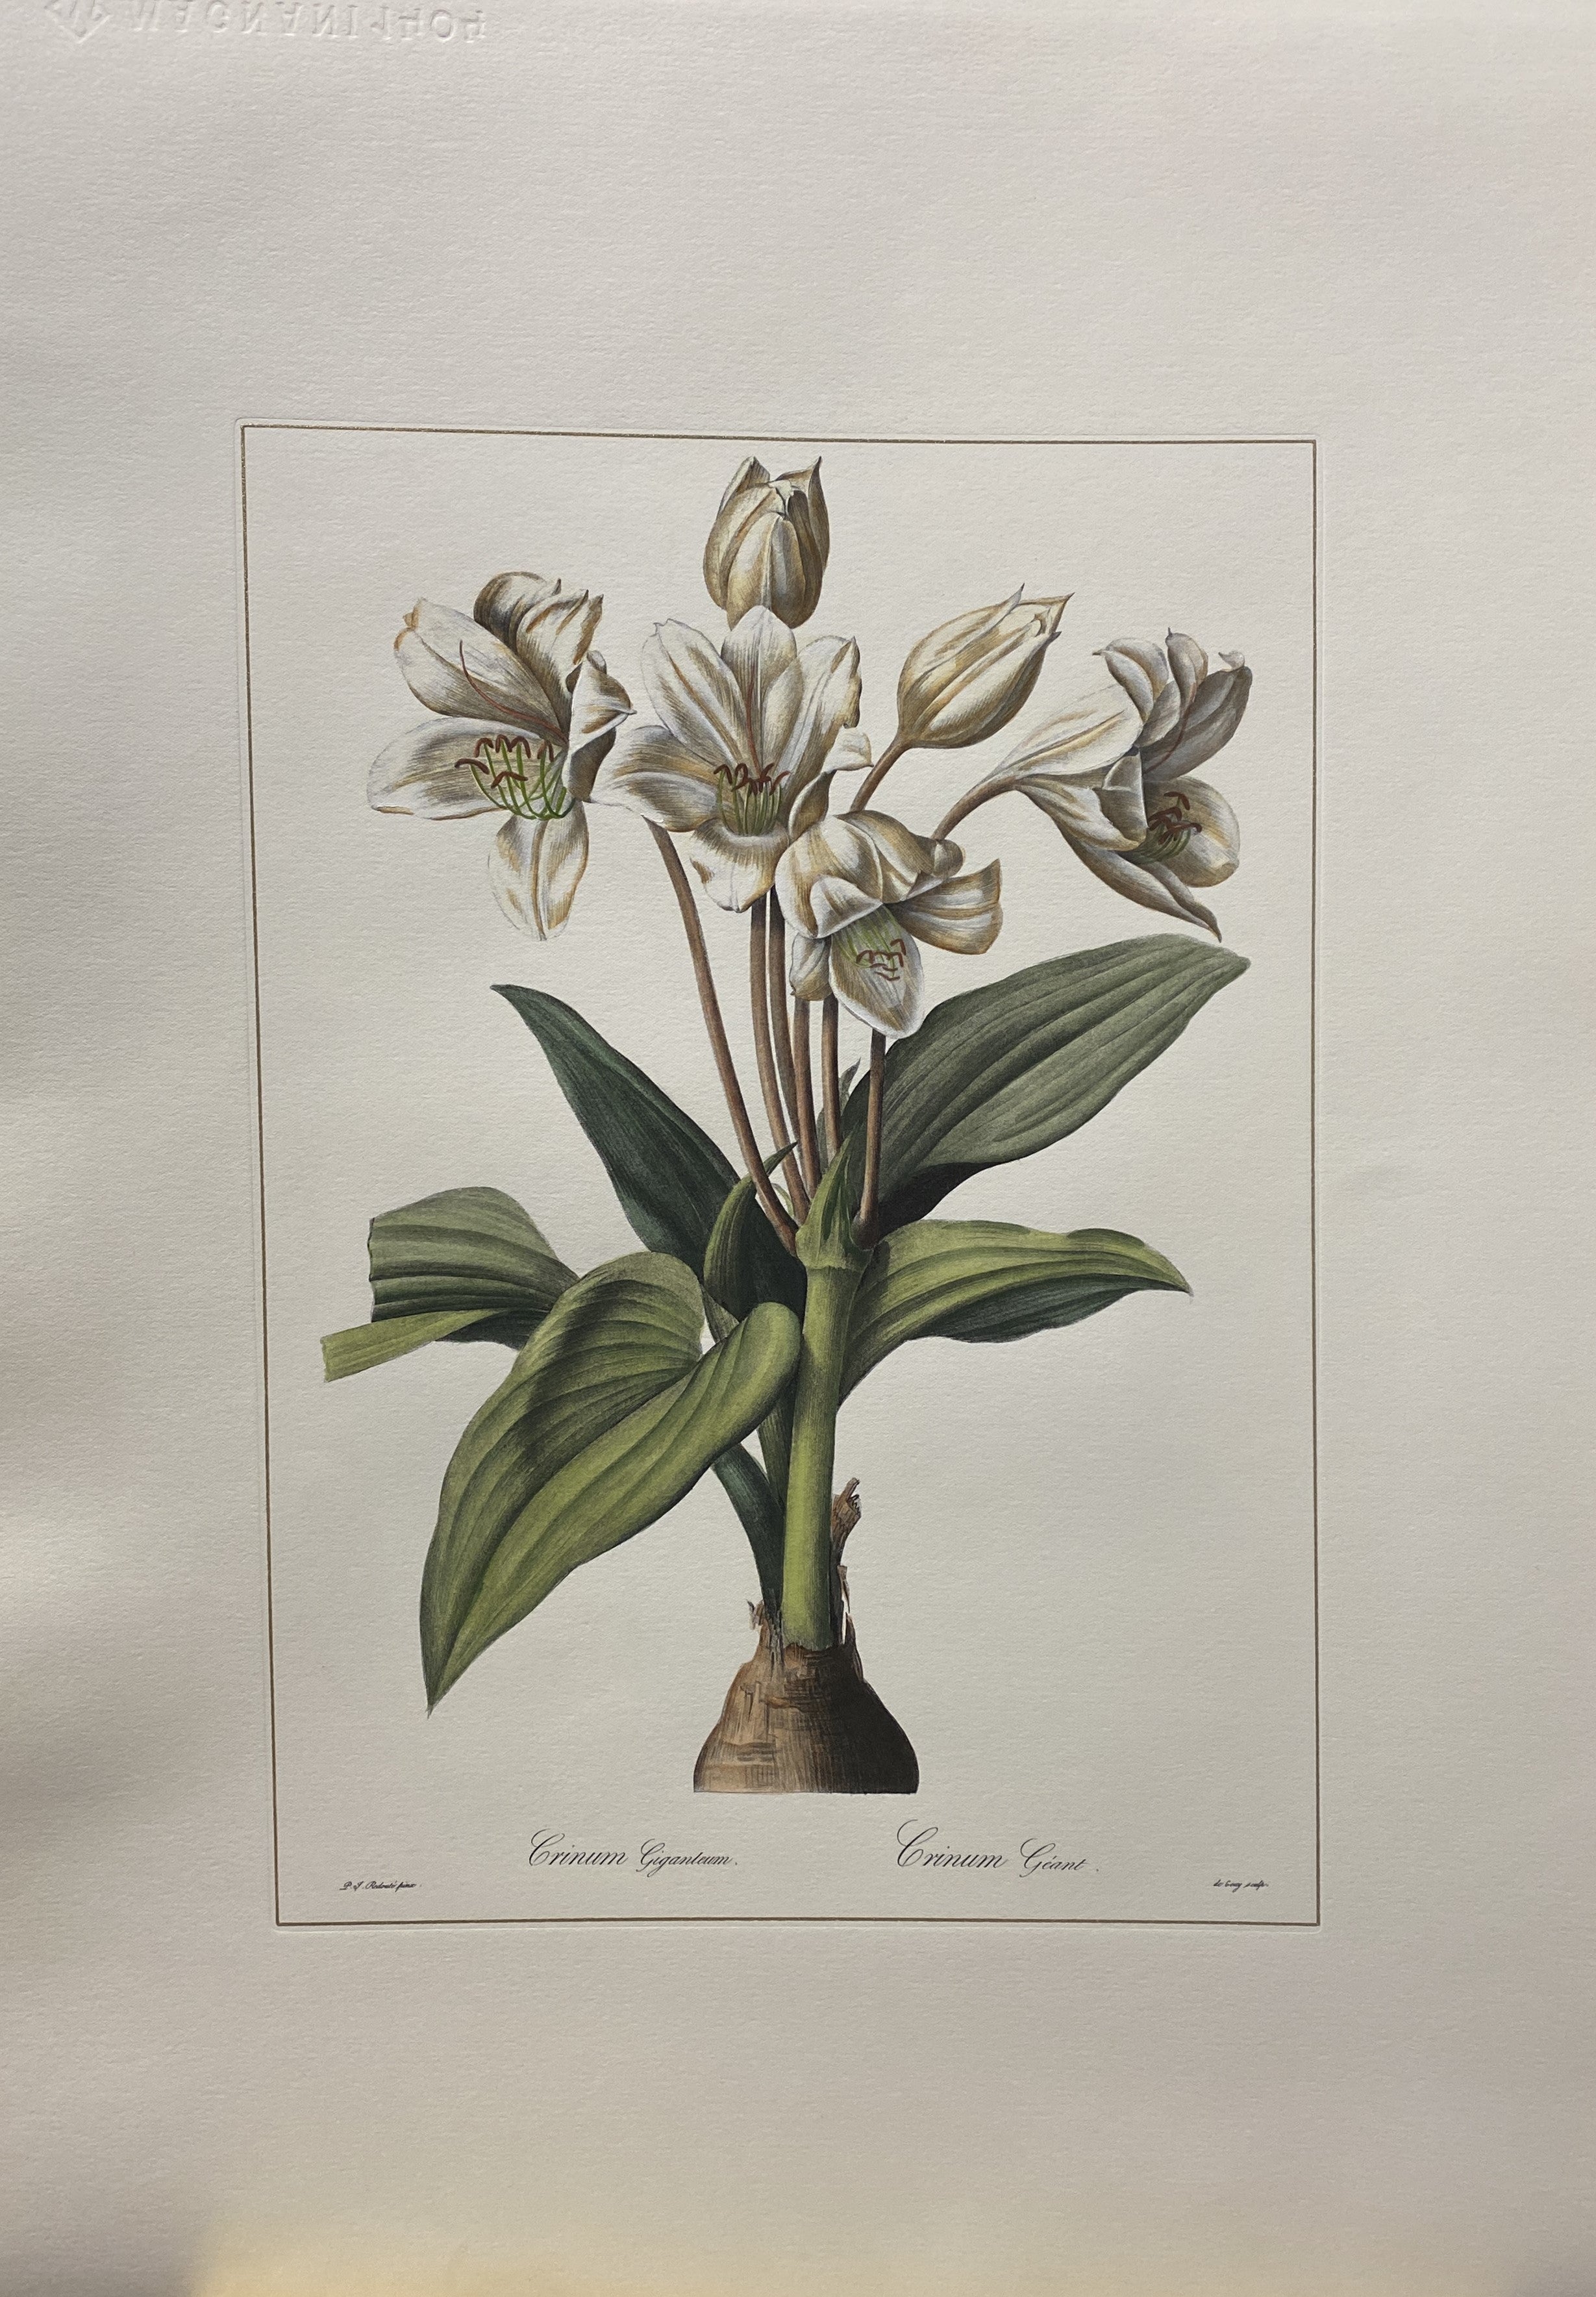 Print from the Collection Botanique representing Crinum Erubescens.

Another different Crinum prints are available to create a colourful composition. Crinum Gigantum.

All the prints are completely hand-coloured by our skilled craftsmen in Florence,